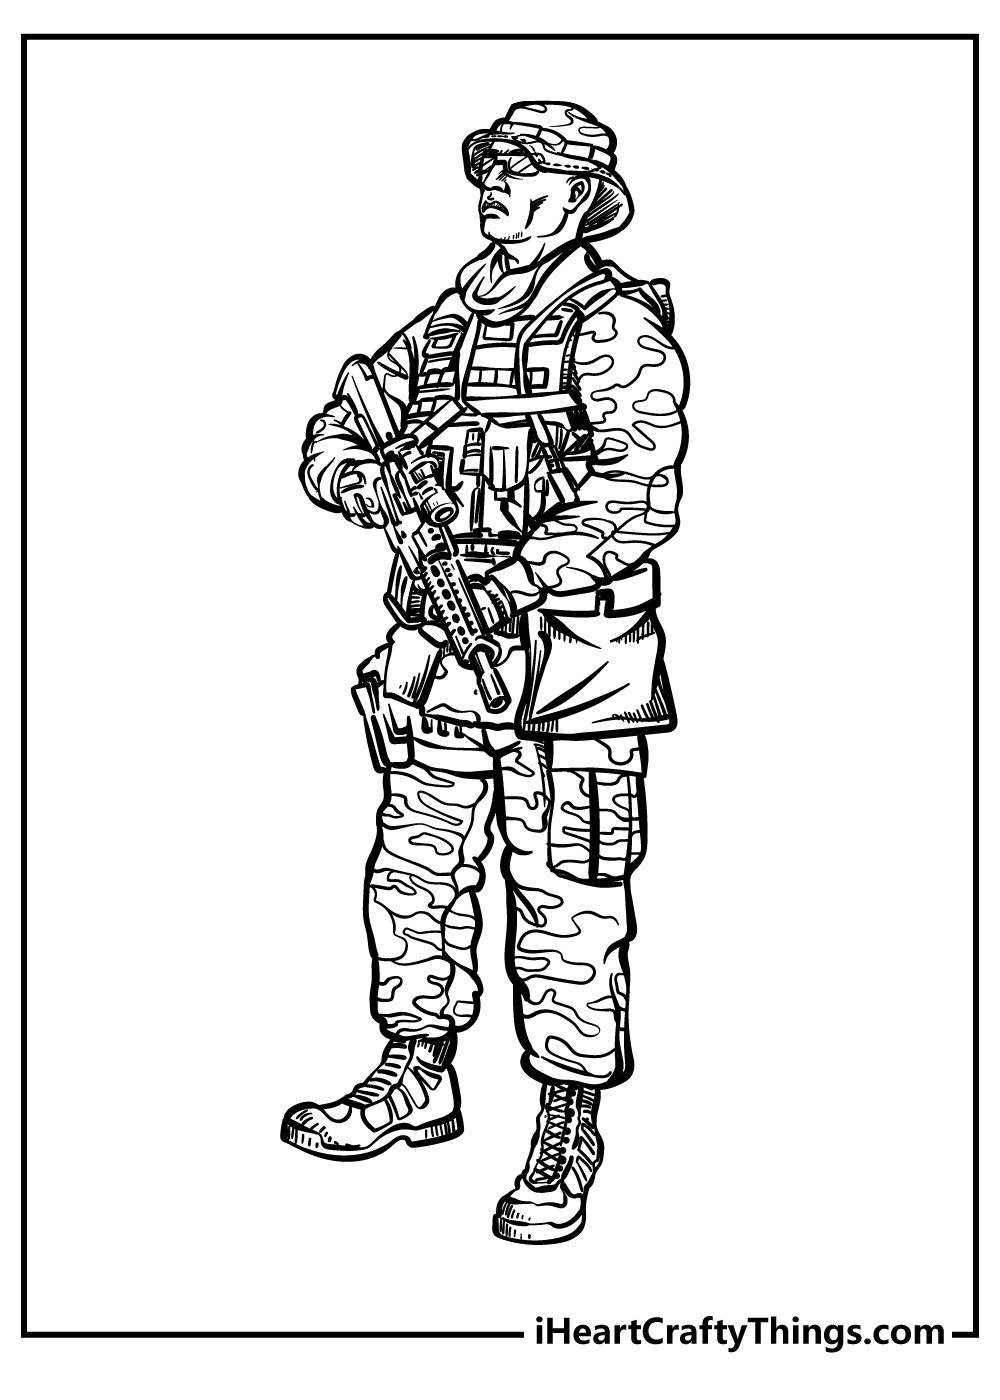 Army Coloring Sheet for children free download